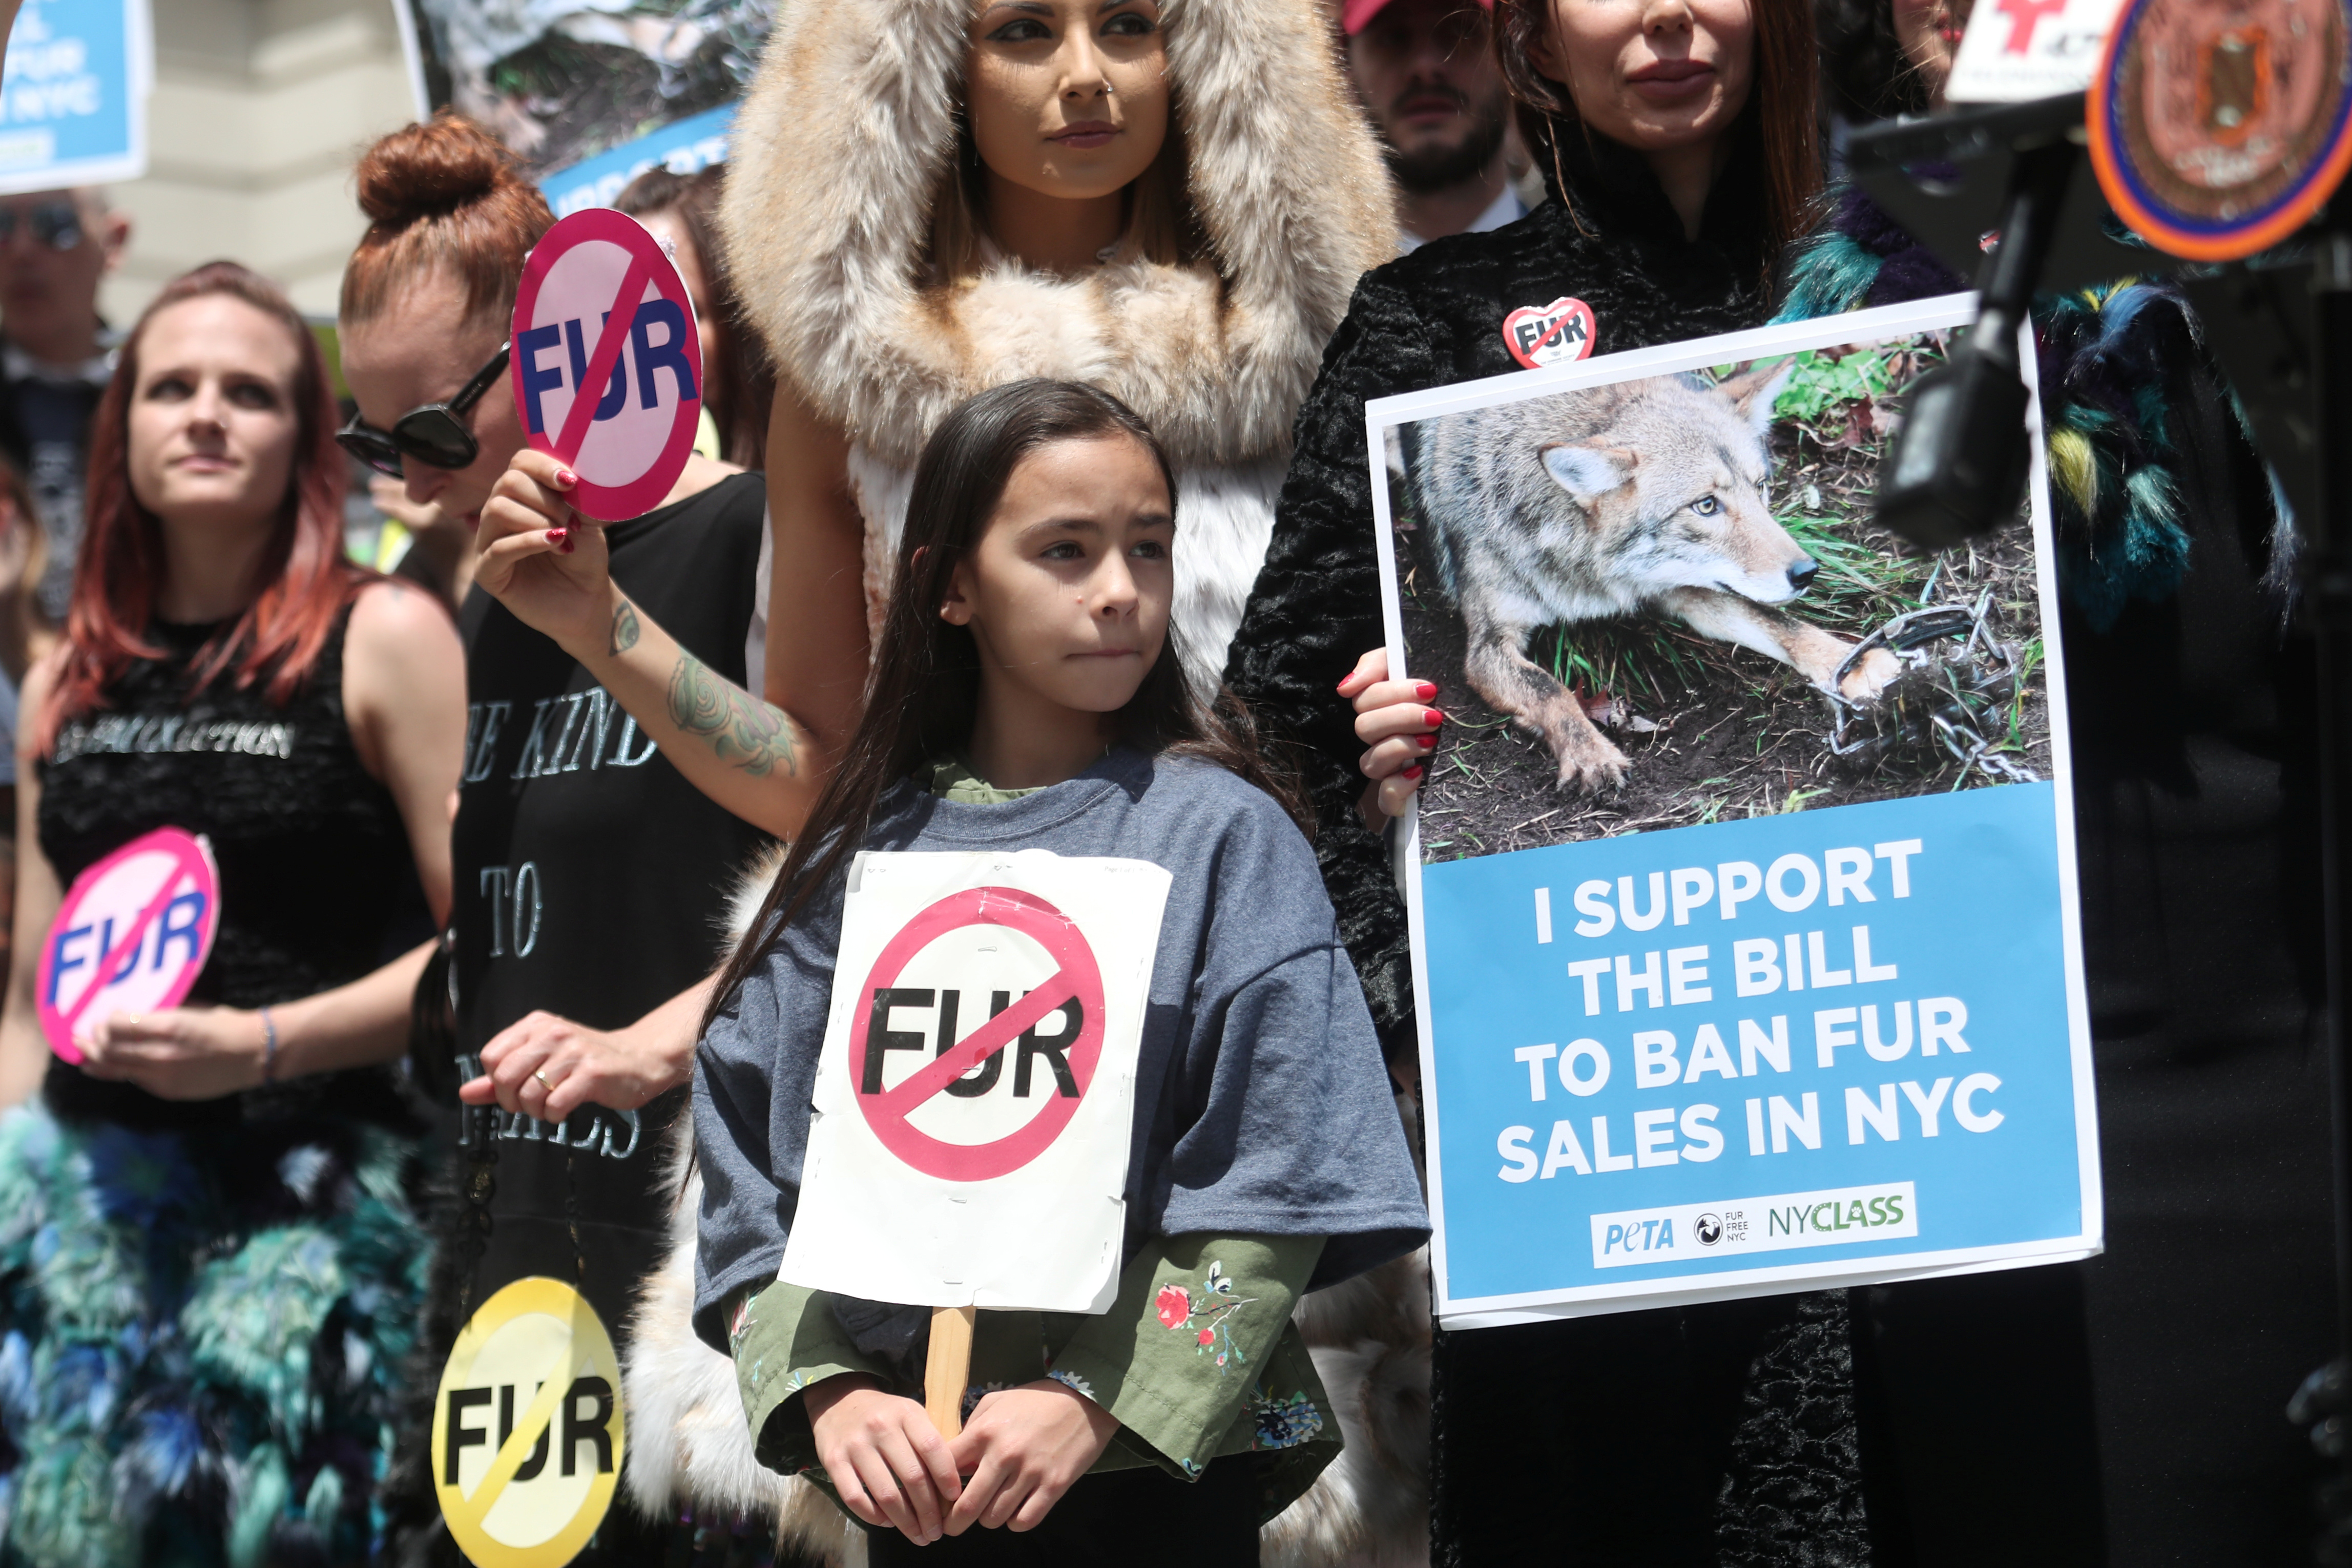 Supporters of a ban on fur sales stand on the steps of City Hall in New York, U.S., May 15, 2019. REUTERS/Shannon Stapleton